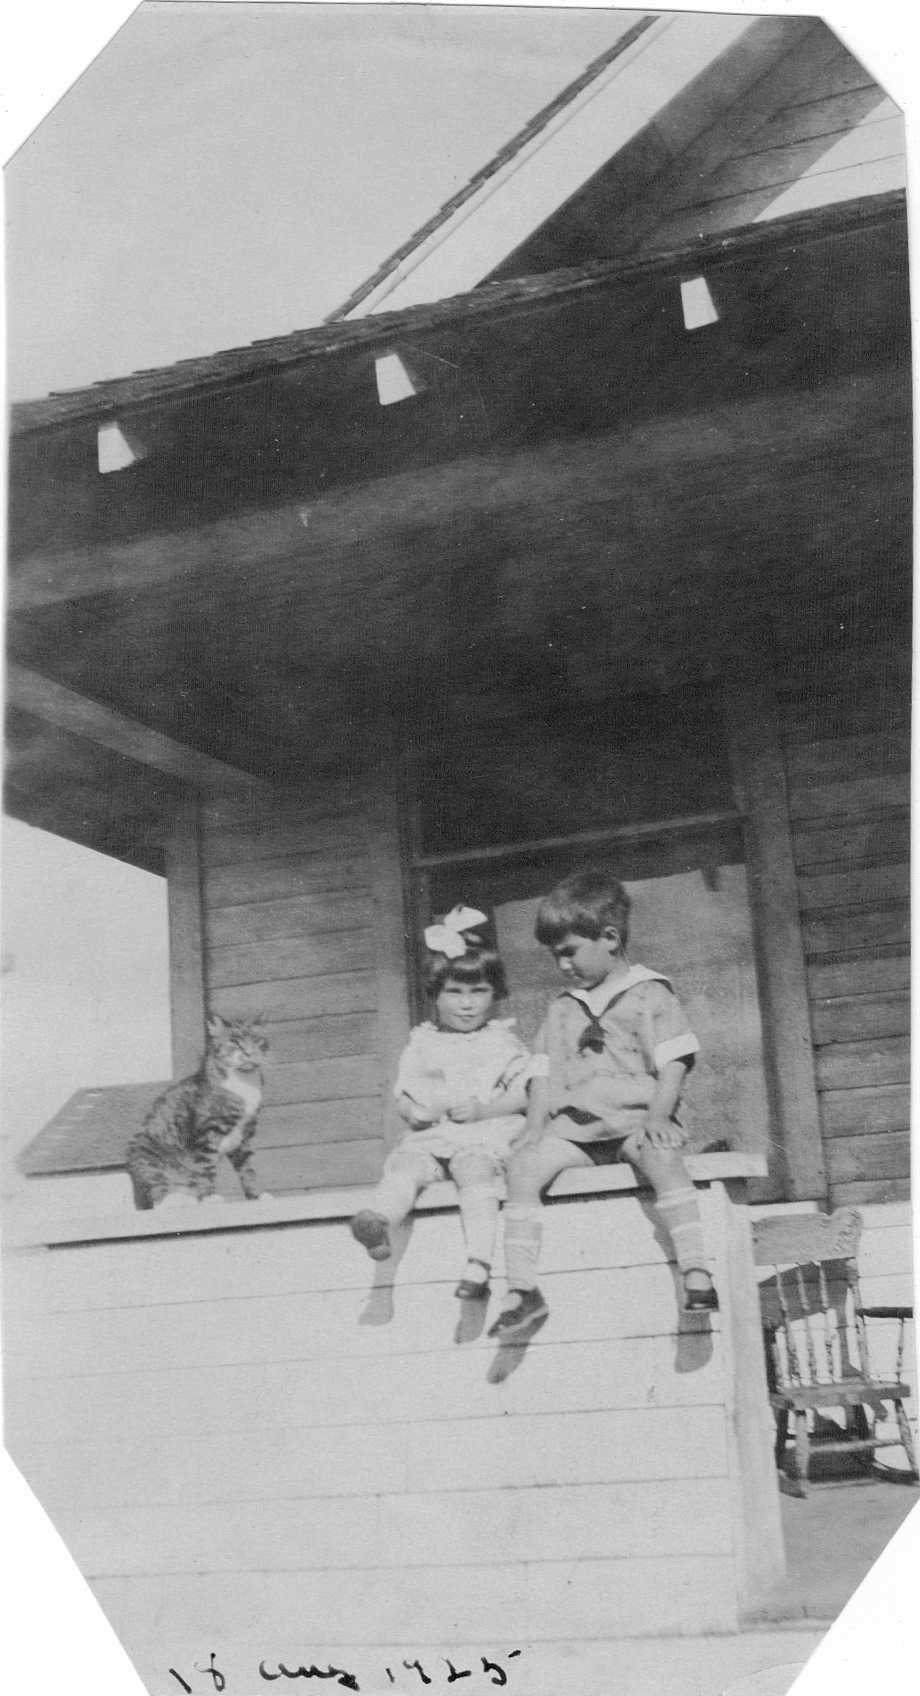 August 18, 1925 Doris and Hubert Brooks on Porch with Cat